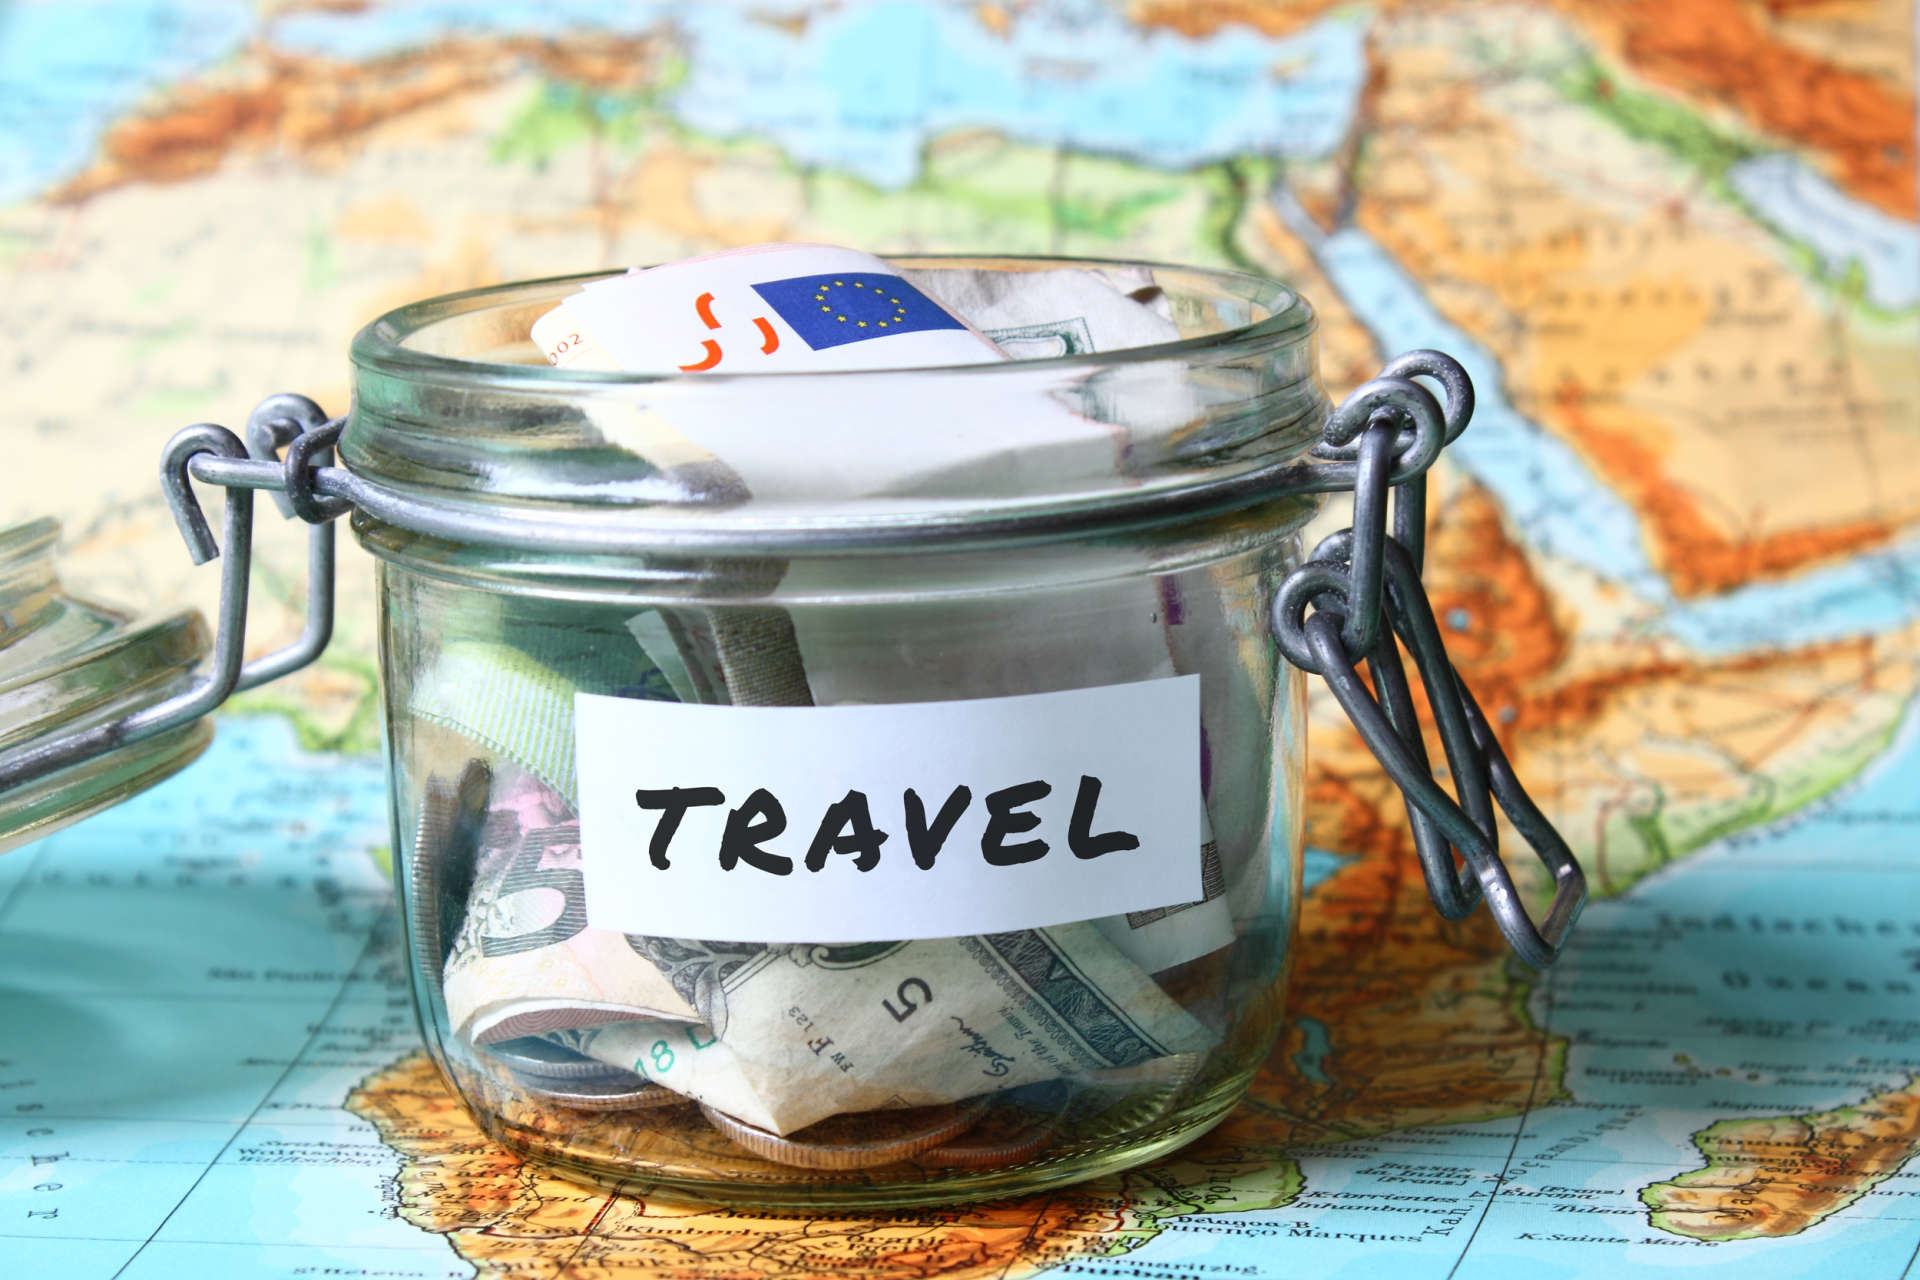 Budgeting for a Destination Working Trip